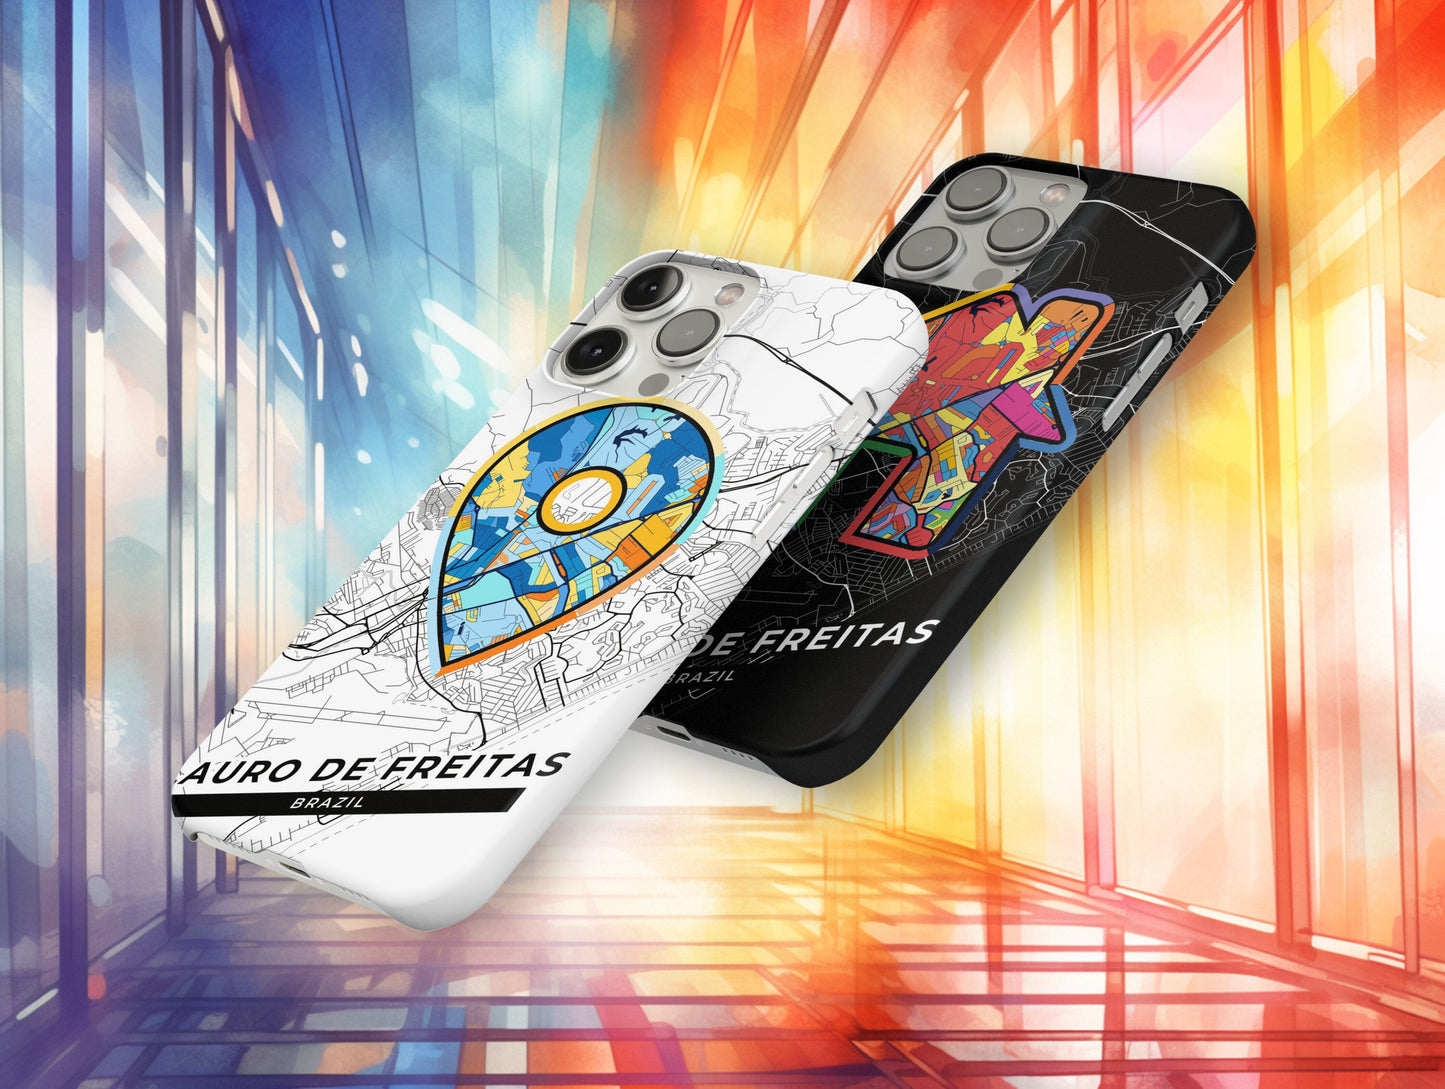 Lauro De Freitas Brazil slim phone case with colorful icon. Birthday, wedding or housewarming gift. Couple match cases.